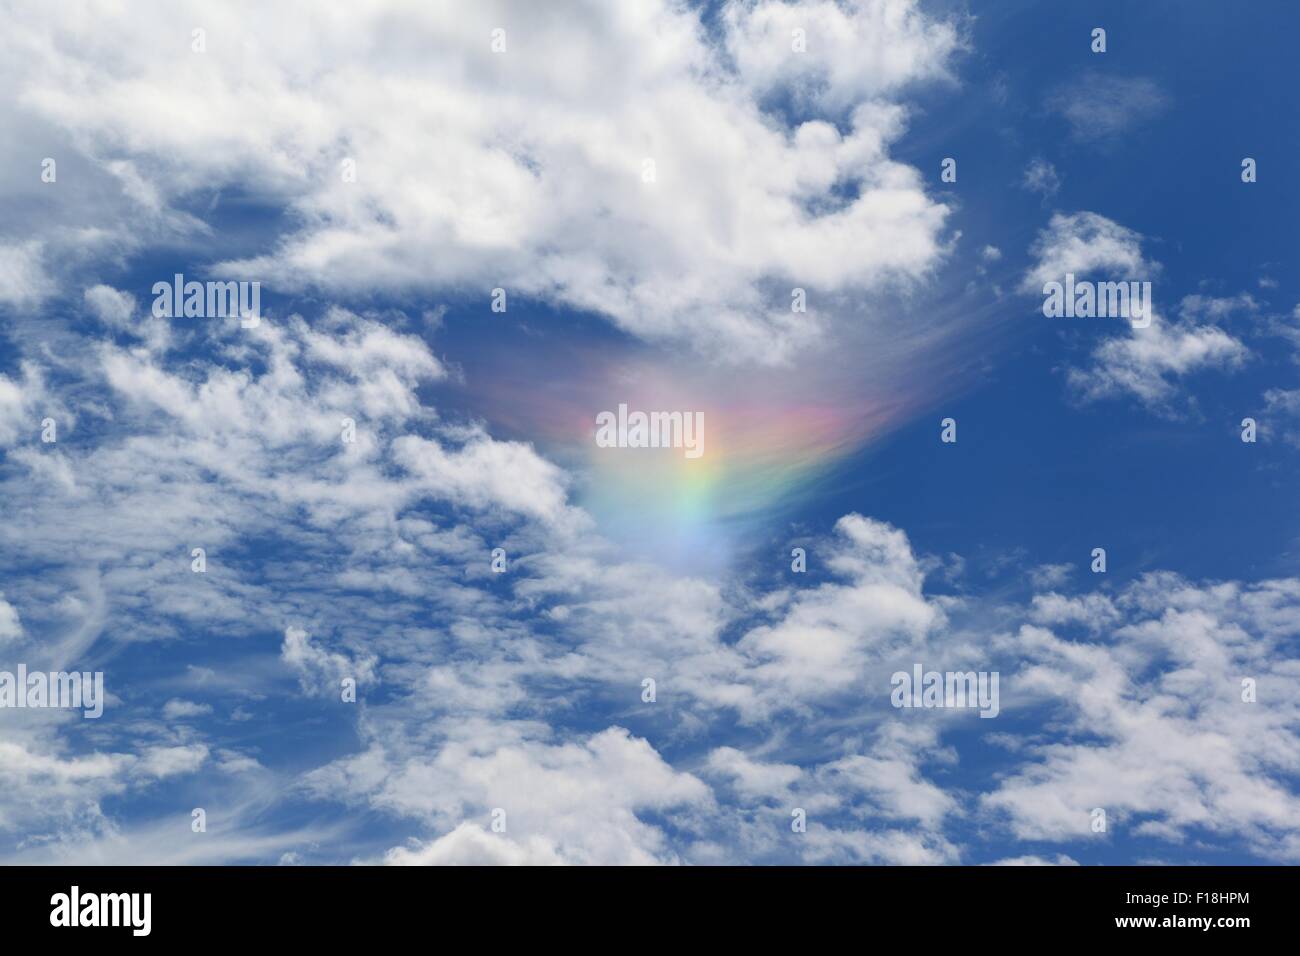 Fire Rainbow in Clouds Stock Photo